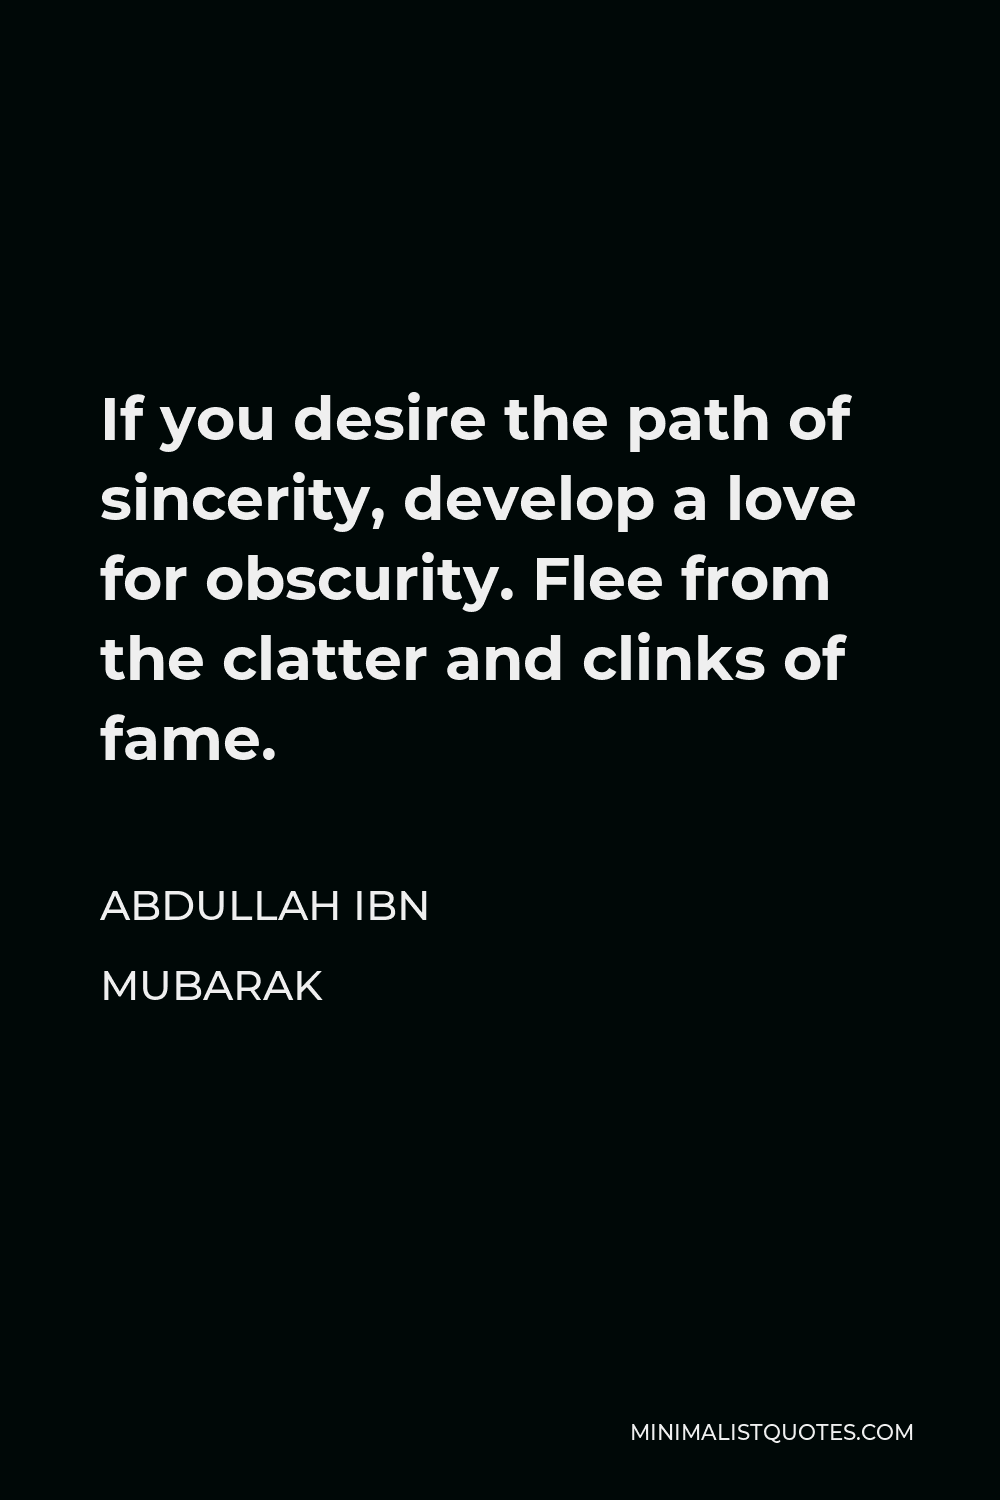 Abdullah ibn Mubarak Quote - If you desire the path of sincerity, develop a love for obscurity. Flee from the clatter and clinks of fame.